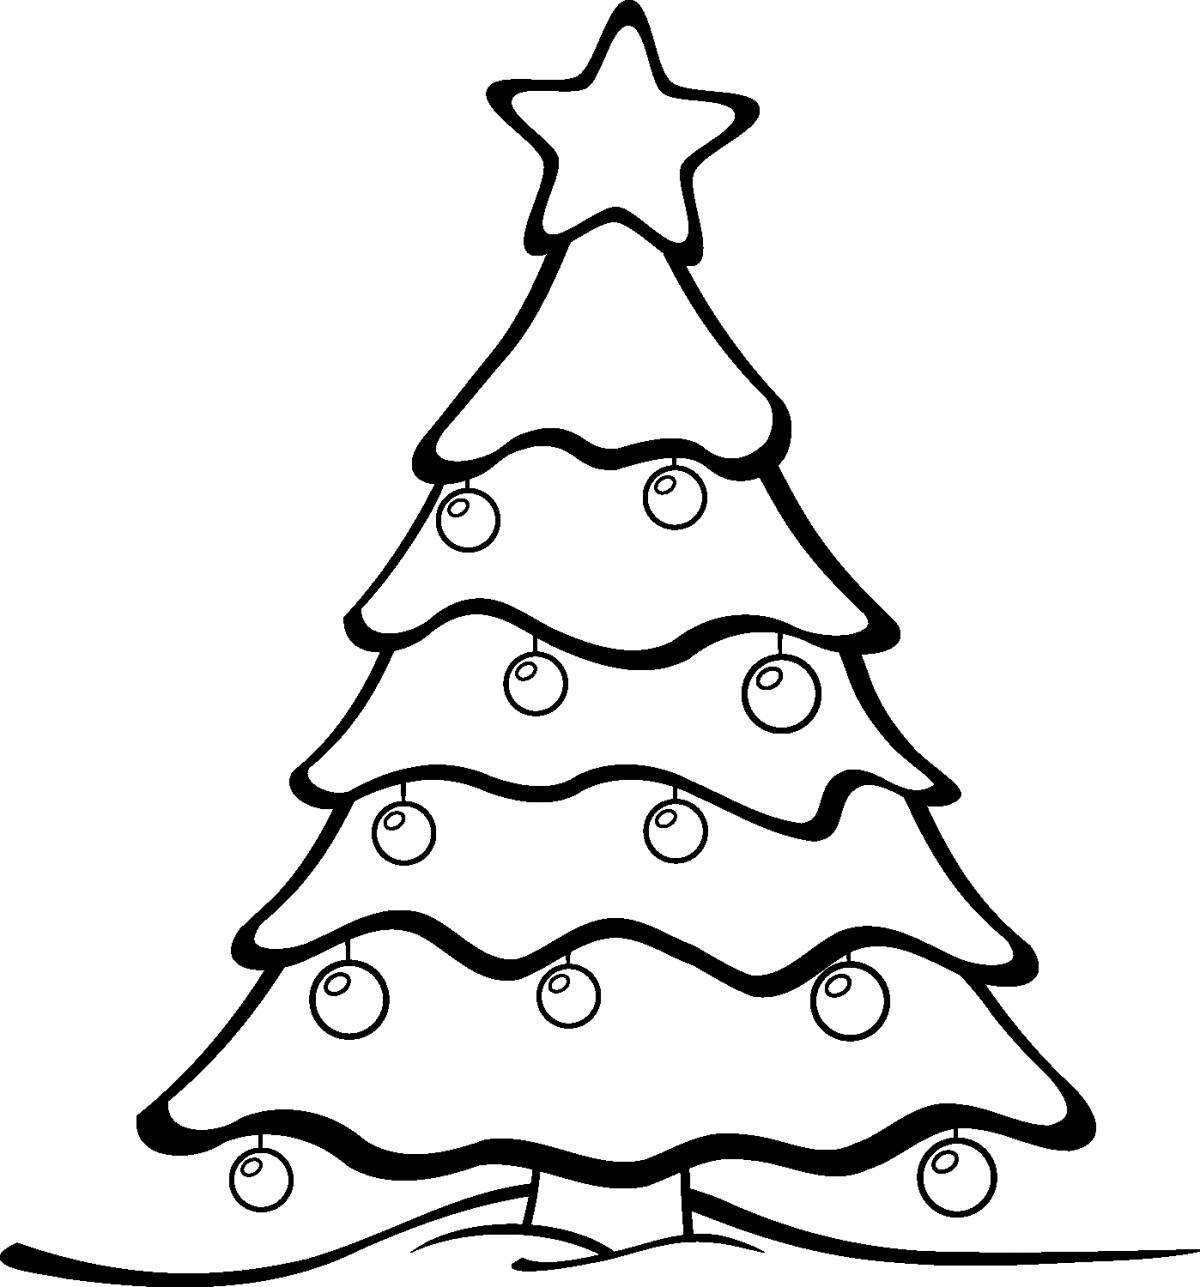 Sparkling Christmas tree coloring book